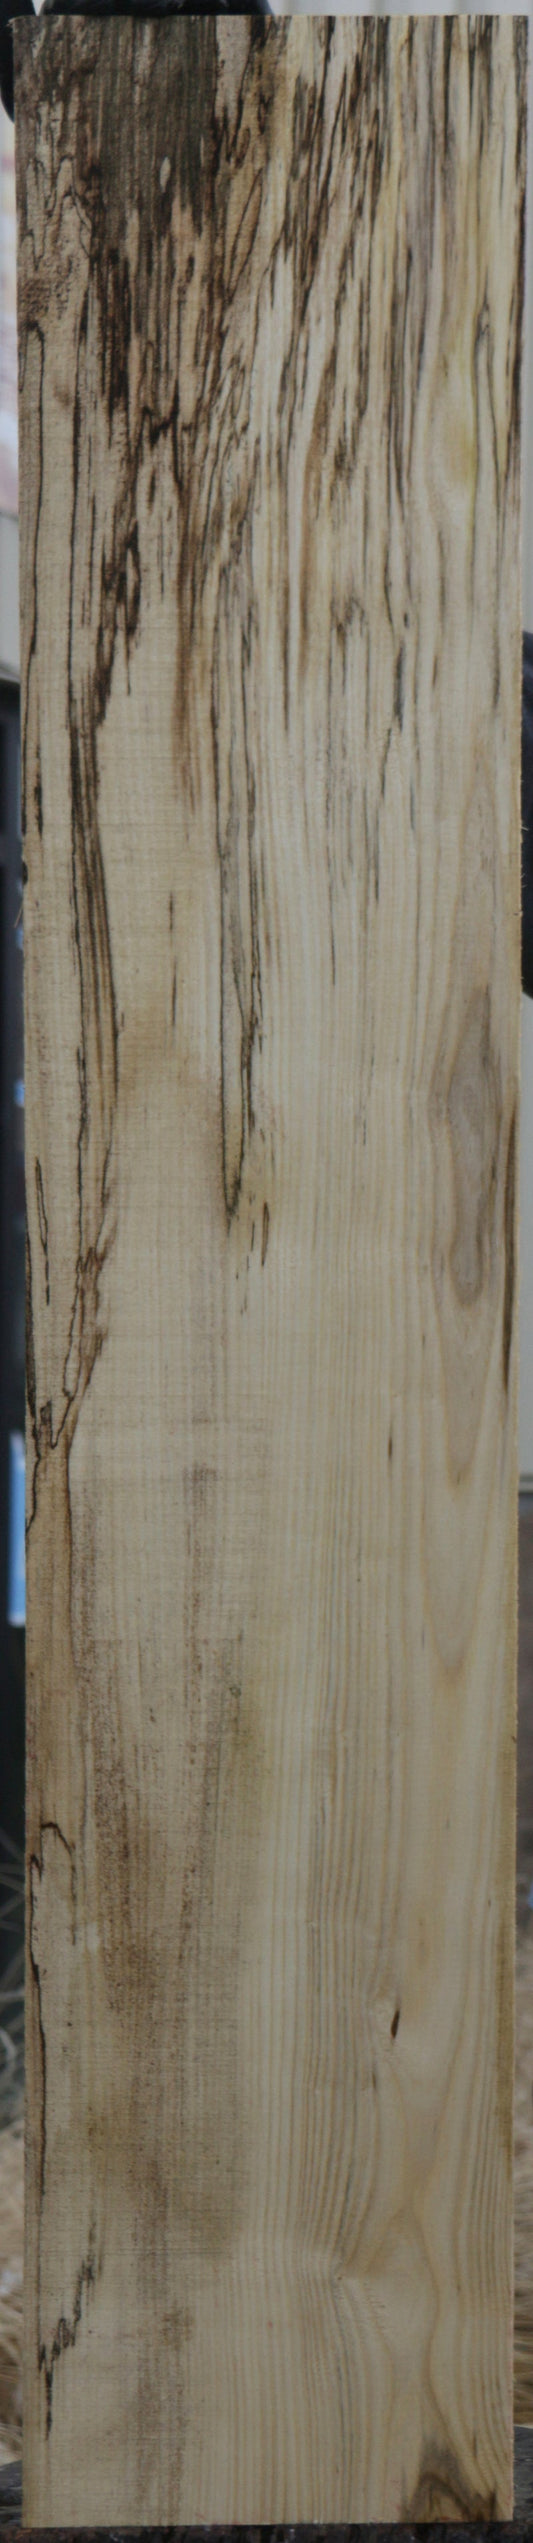 Extra Fancy Spalted Hackberry Lumber